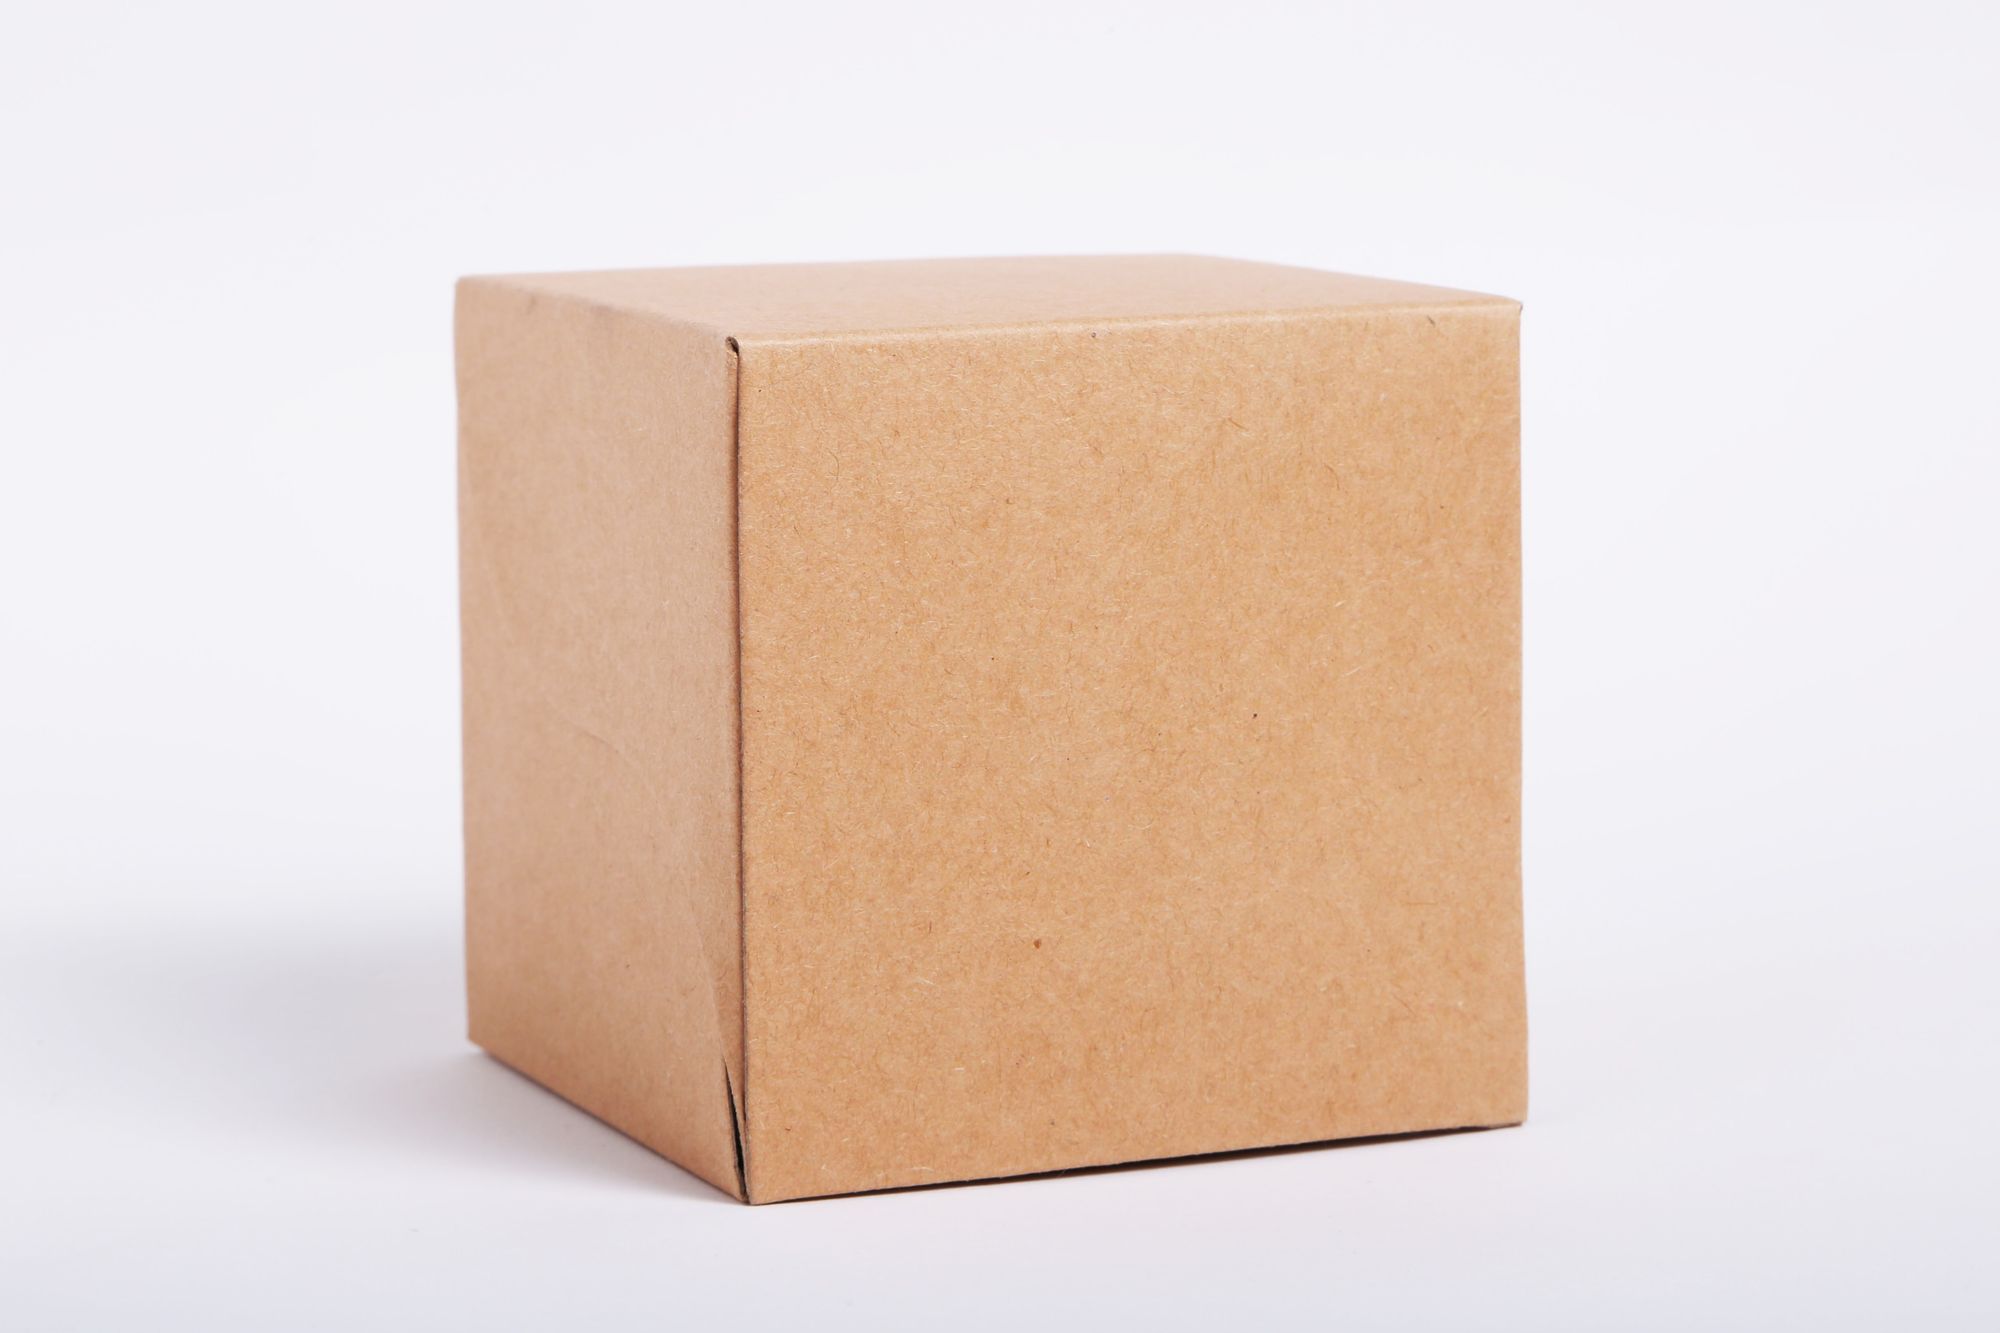 A picture of a sturdy shipping box